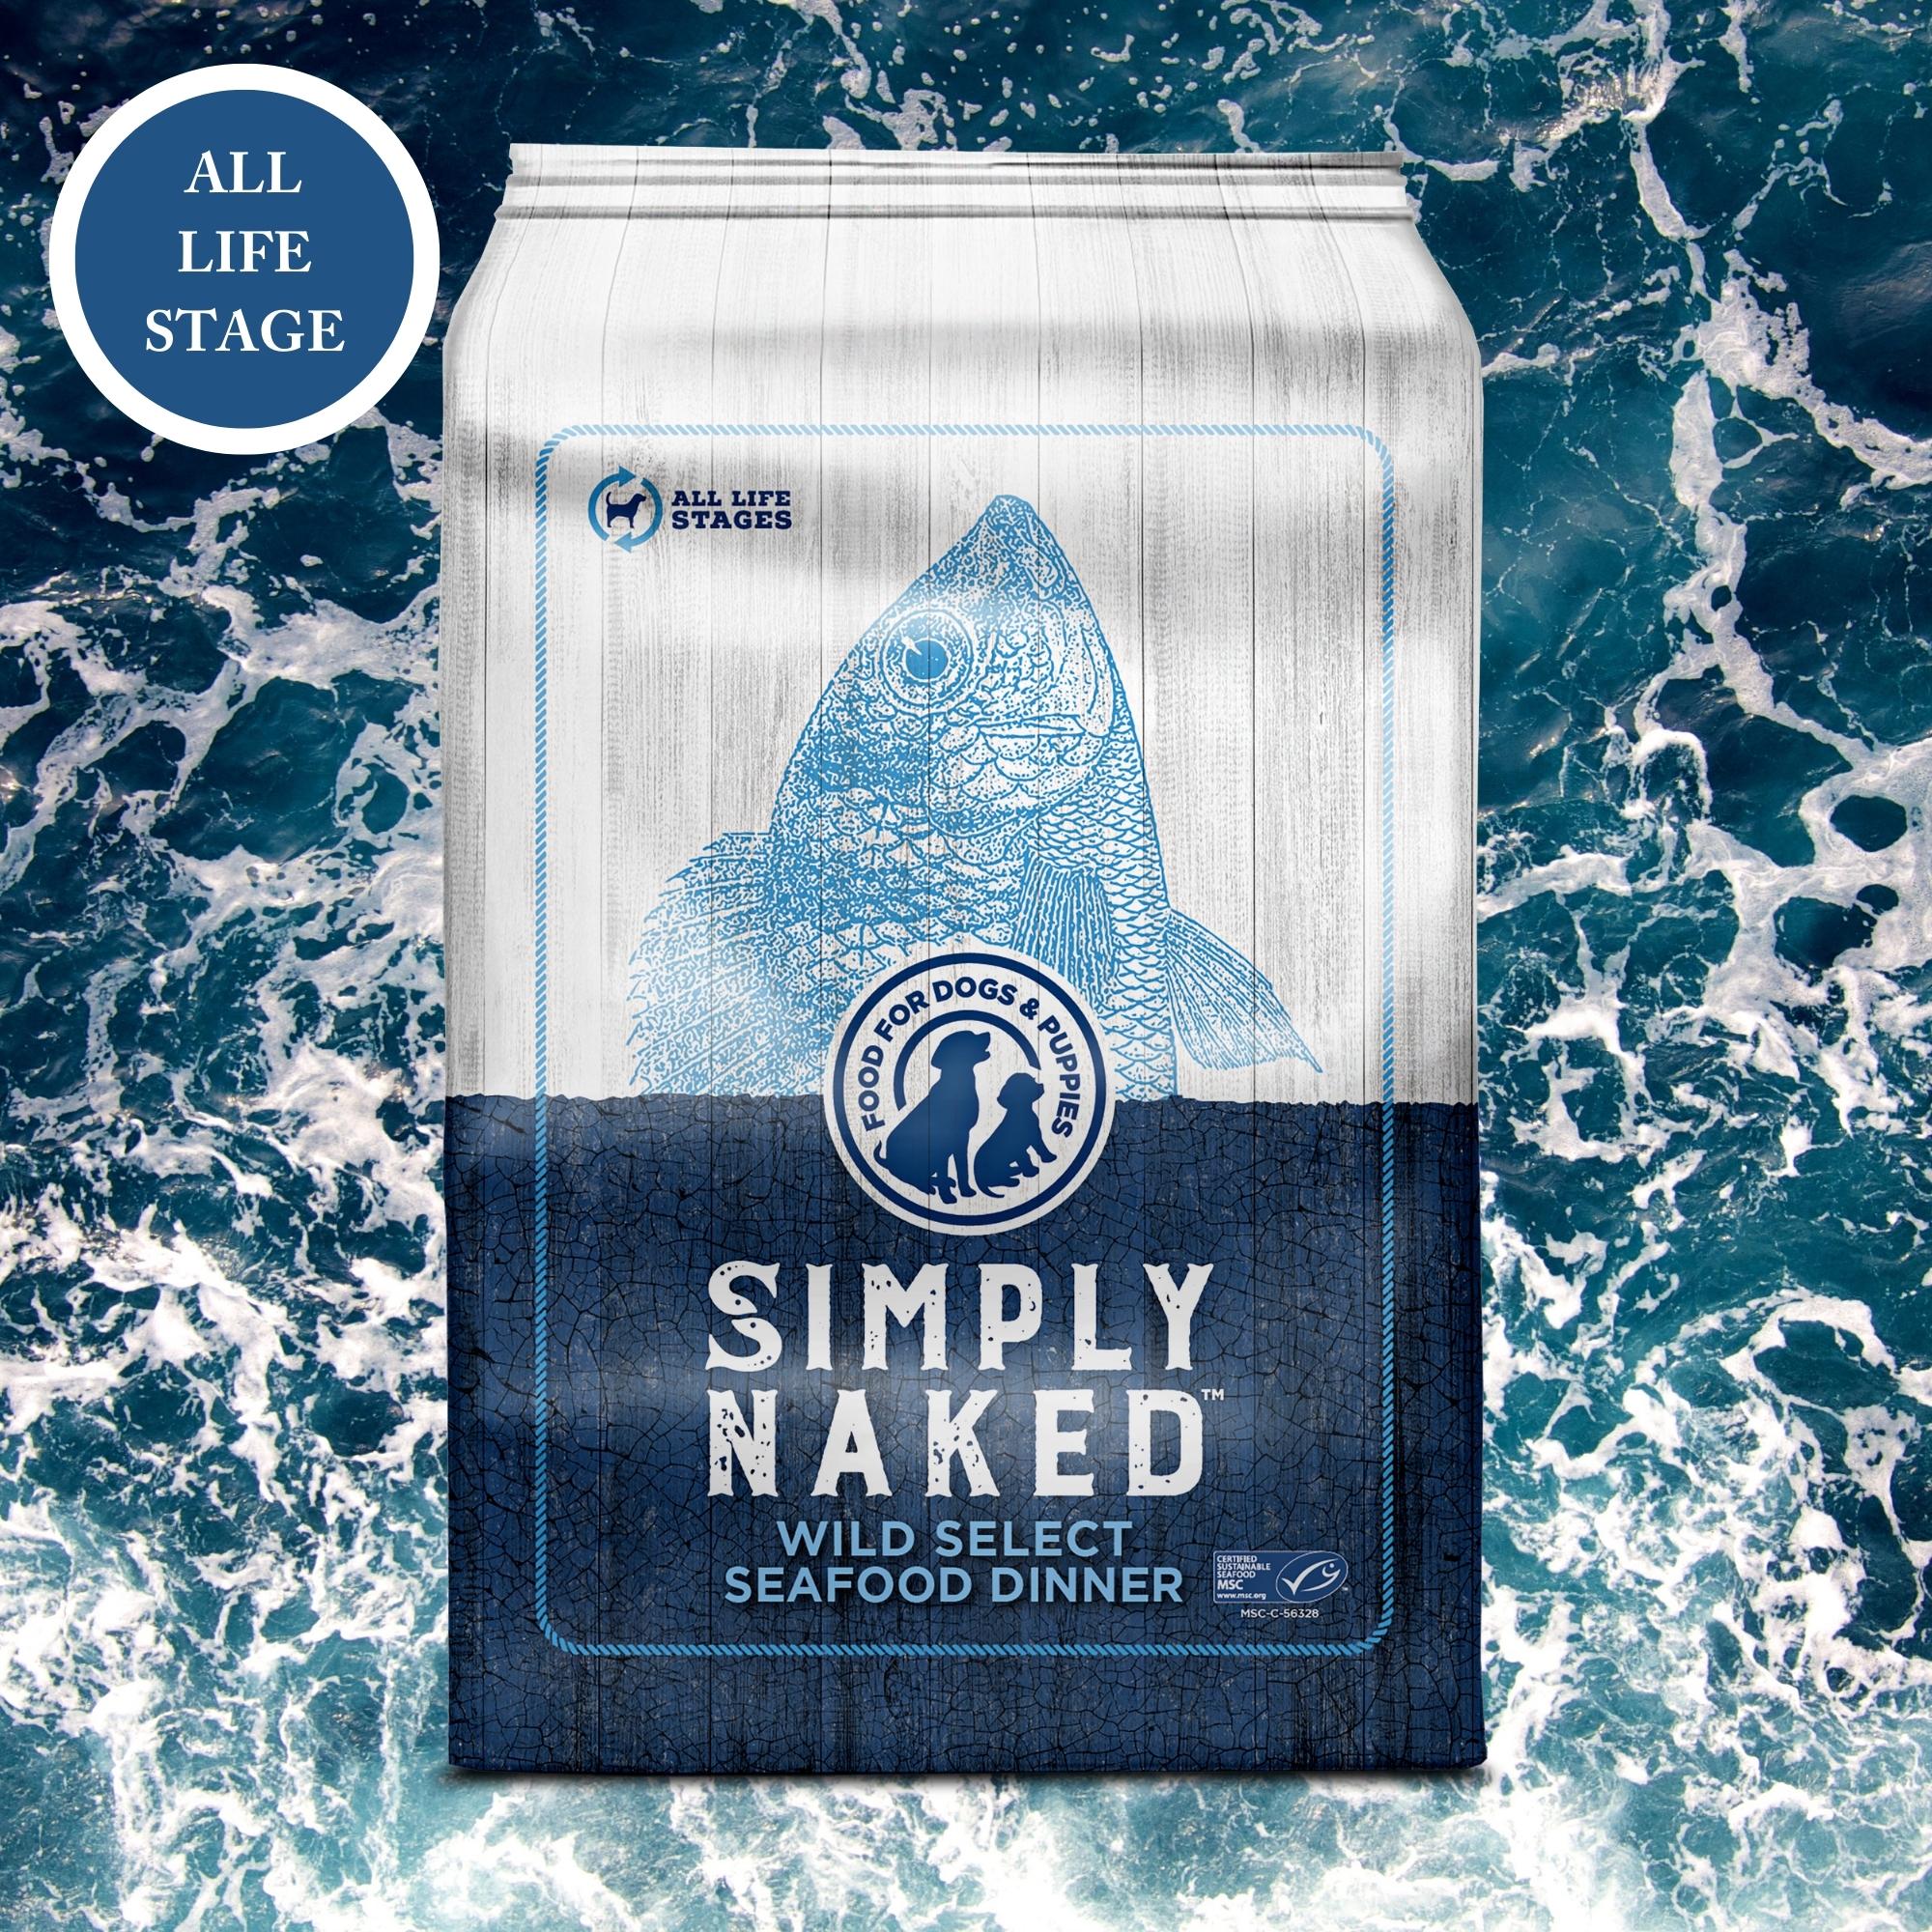 Wild Select Seafood Dinner for Dogs - Simply Naked Fish Based Dog Food for All Life Stages